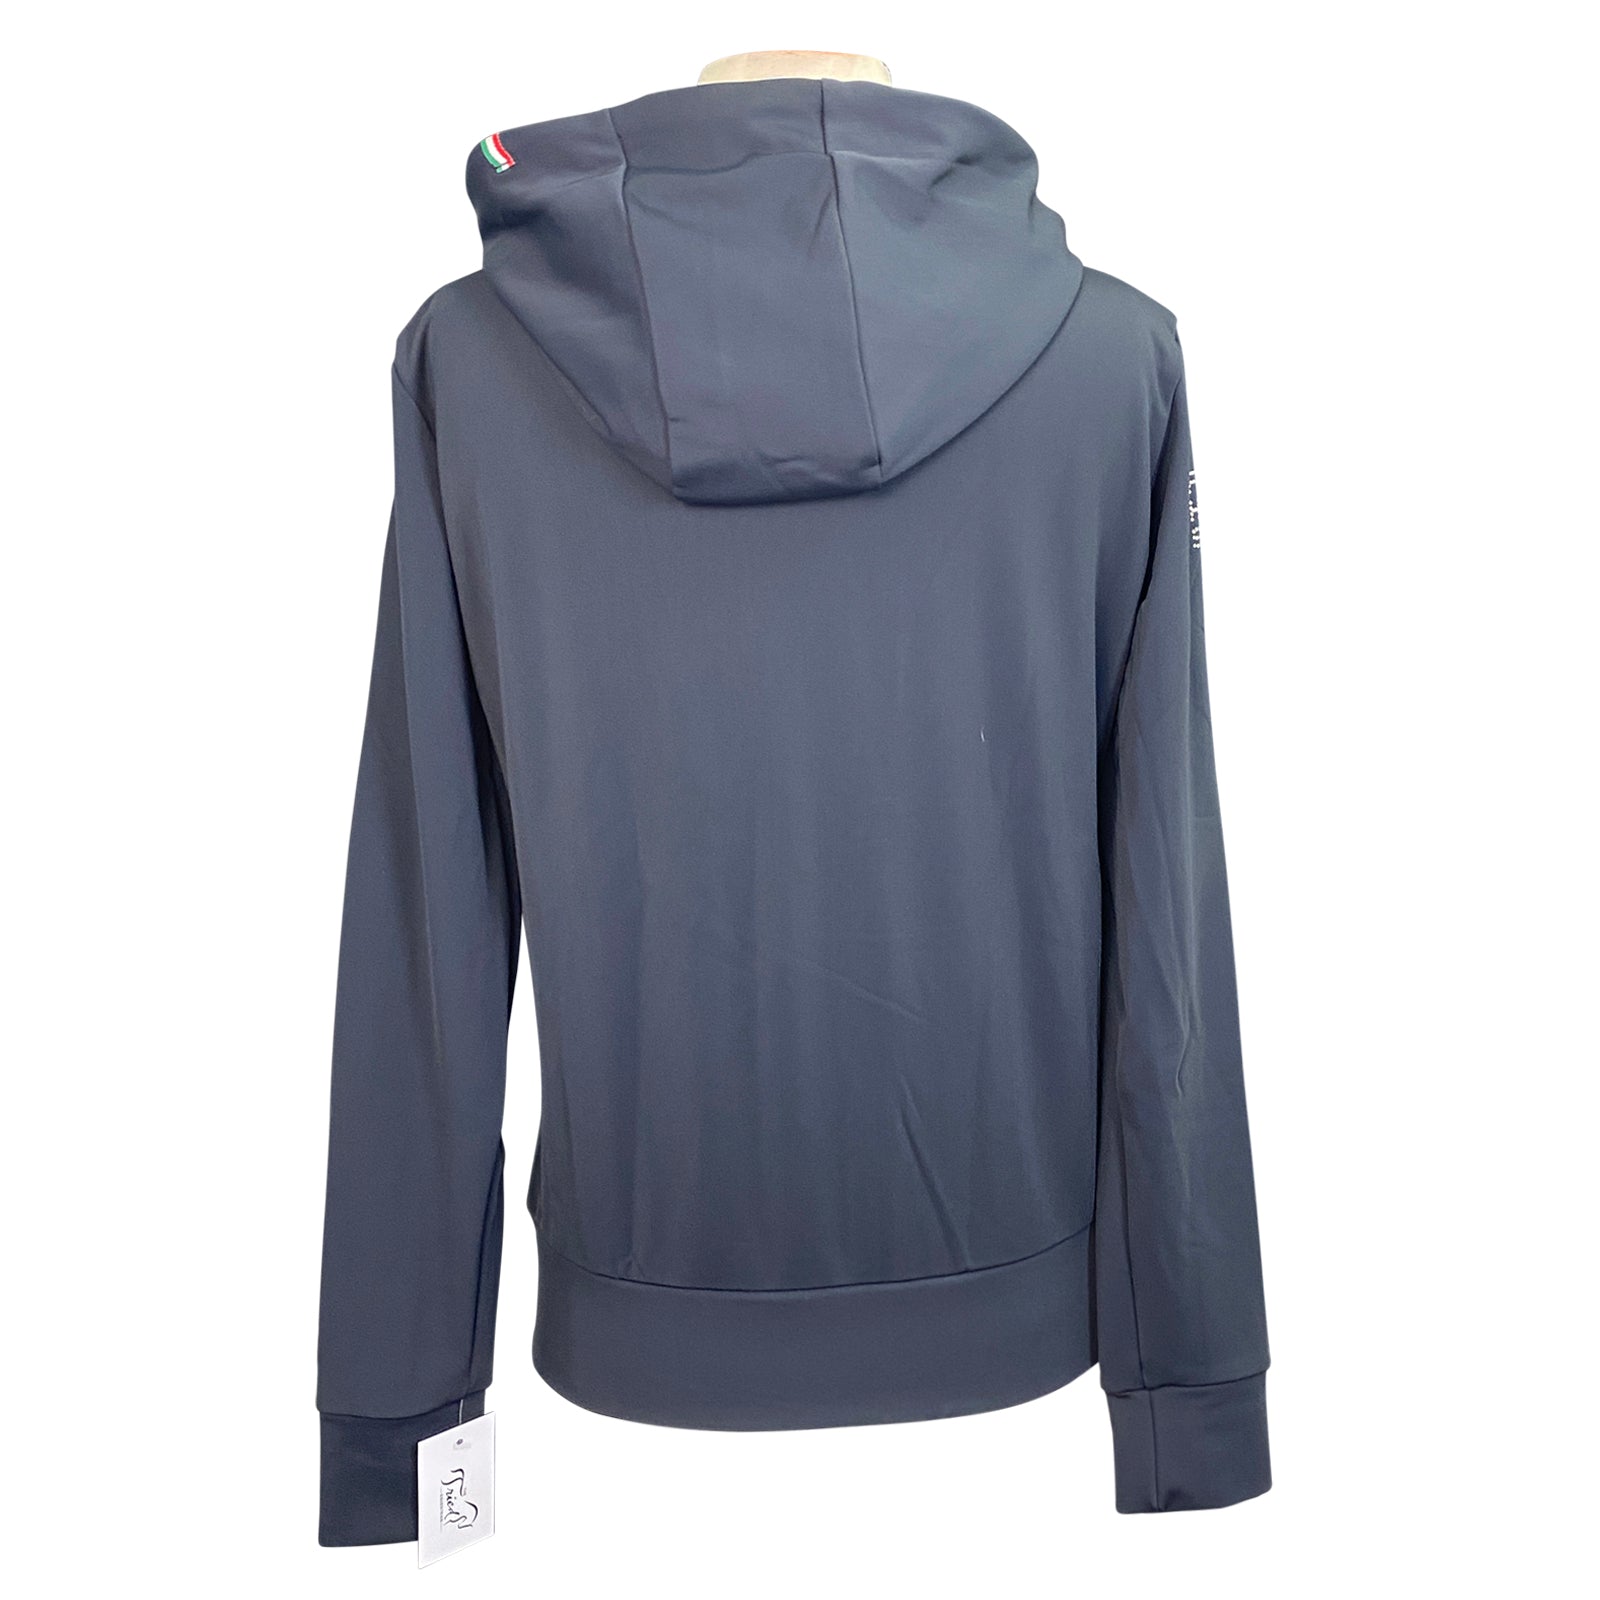 For Horses 'Maggy' Softshell Jacket in Grey